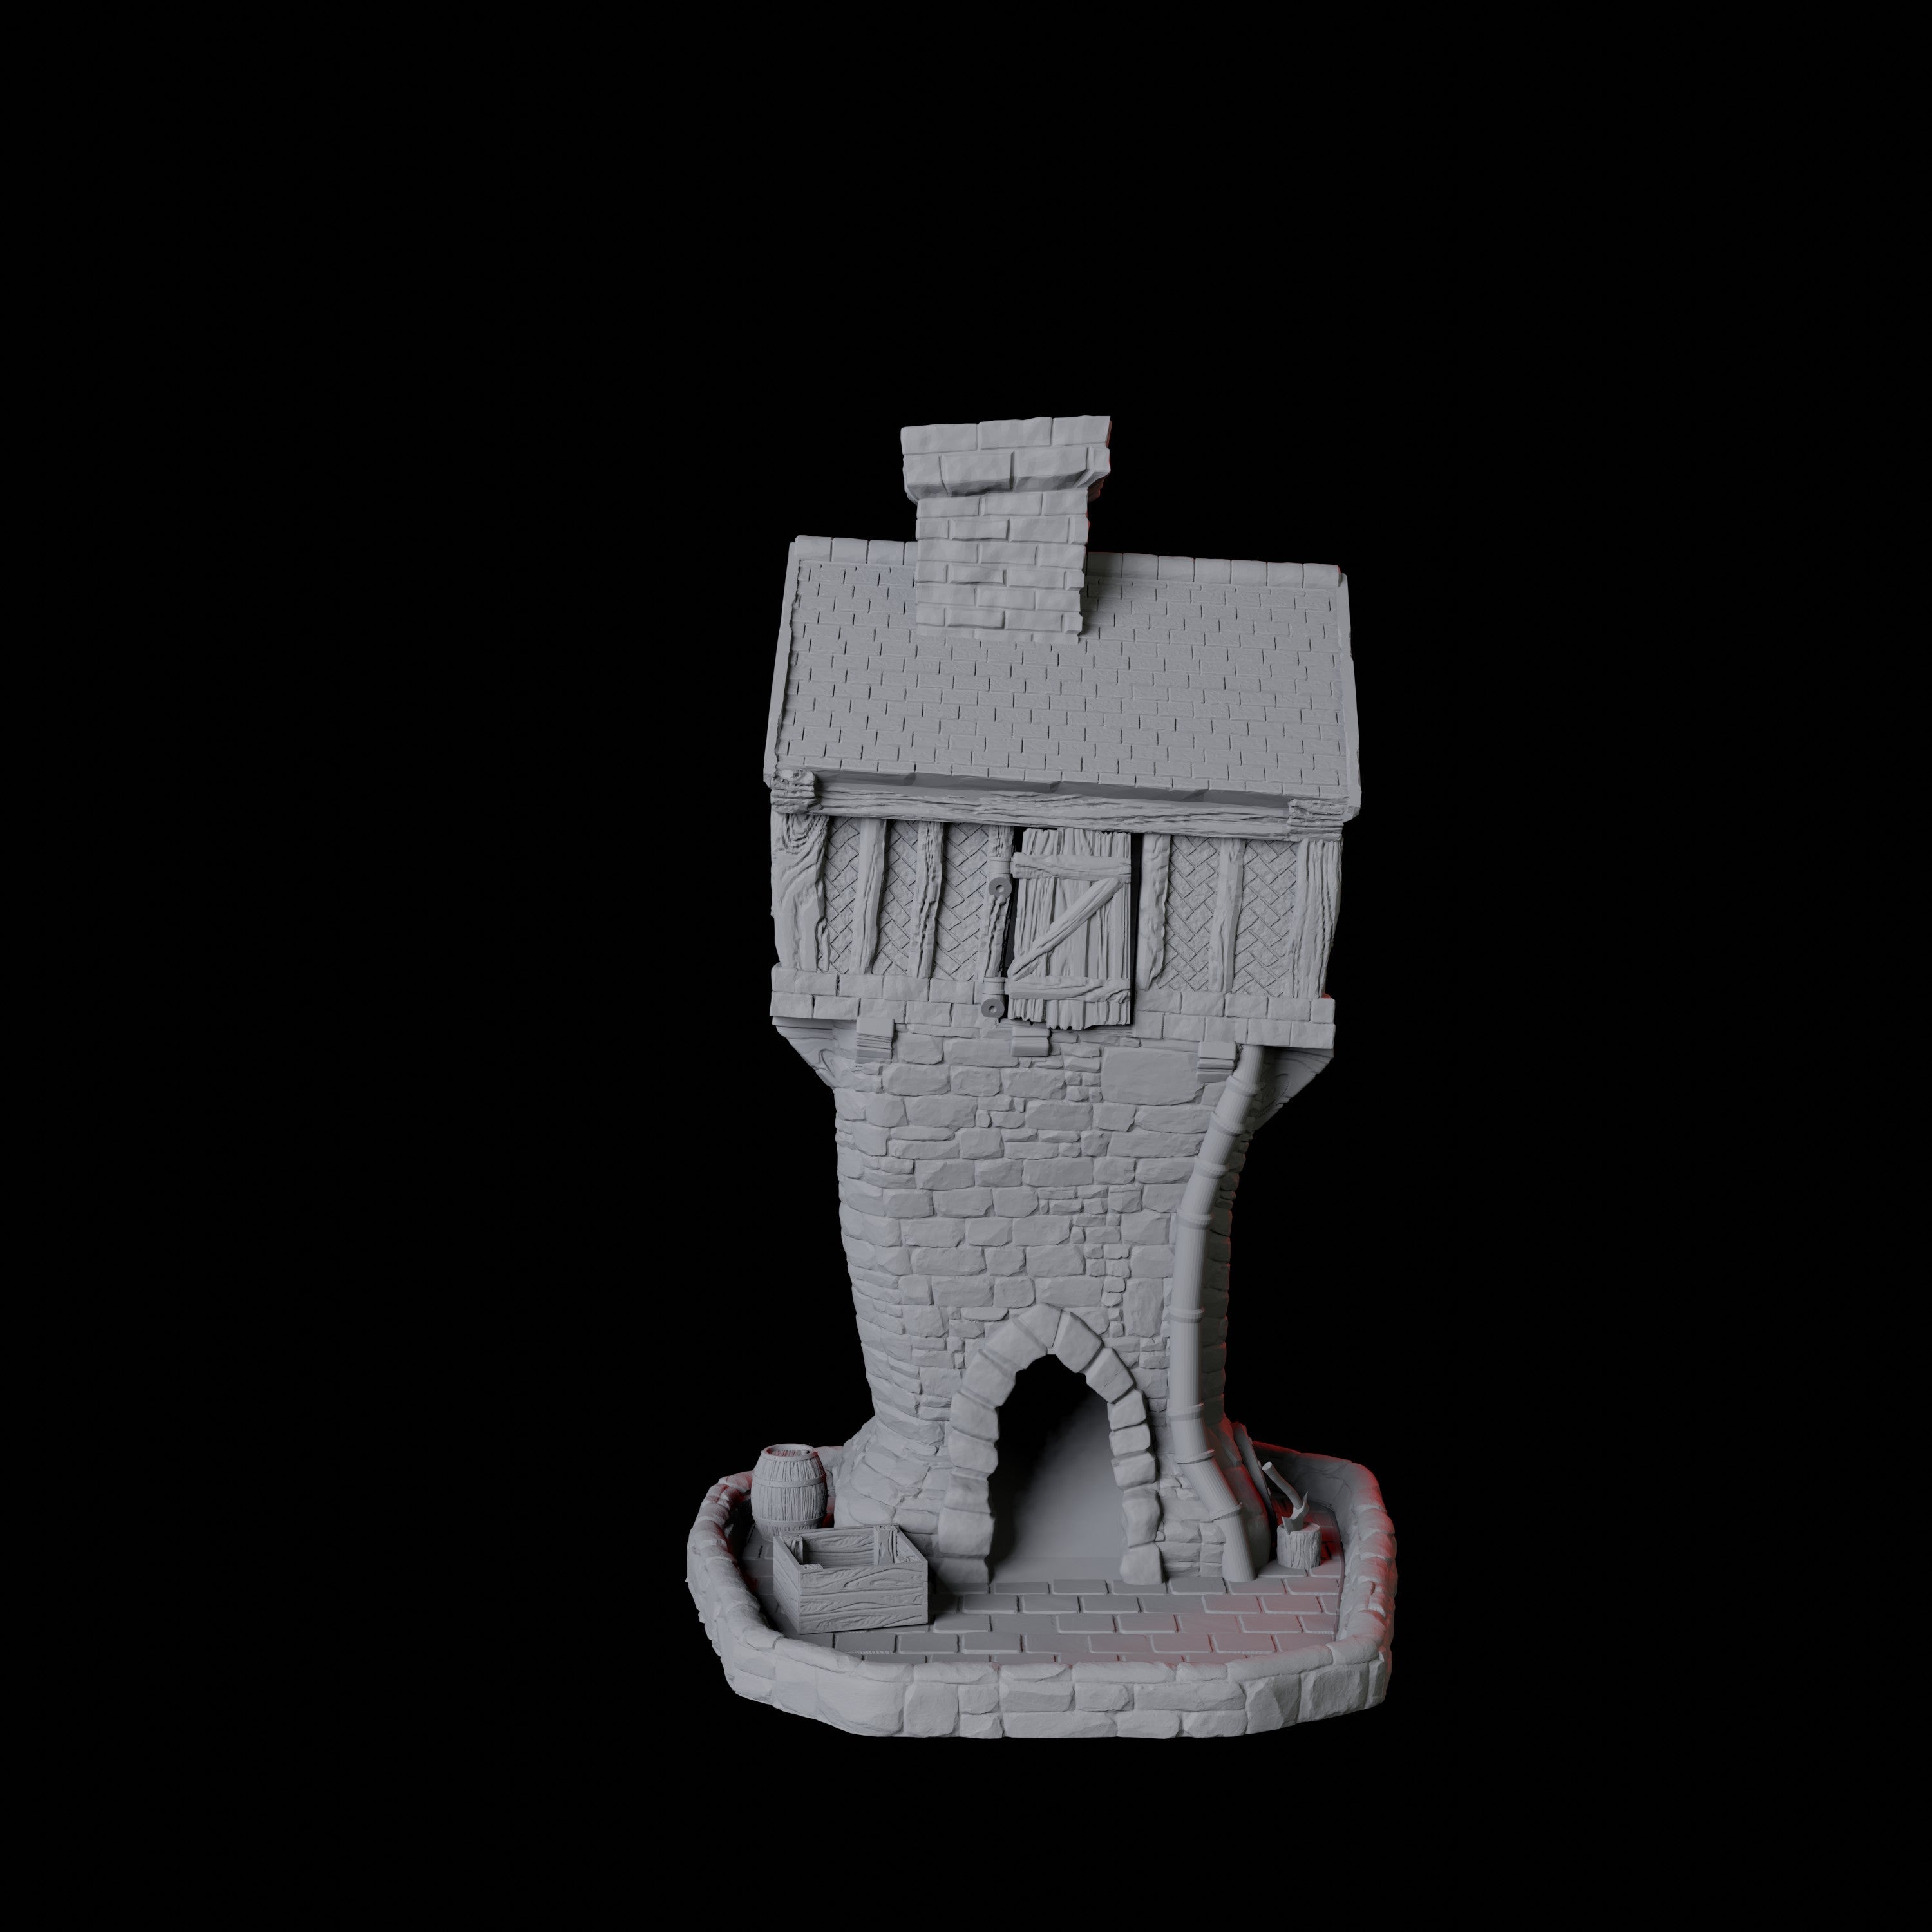 Tiled Cottage Dice Tower Miniature for Dungeons and Dragons